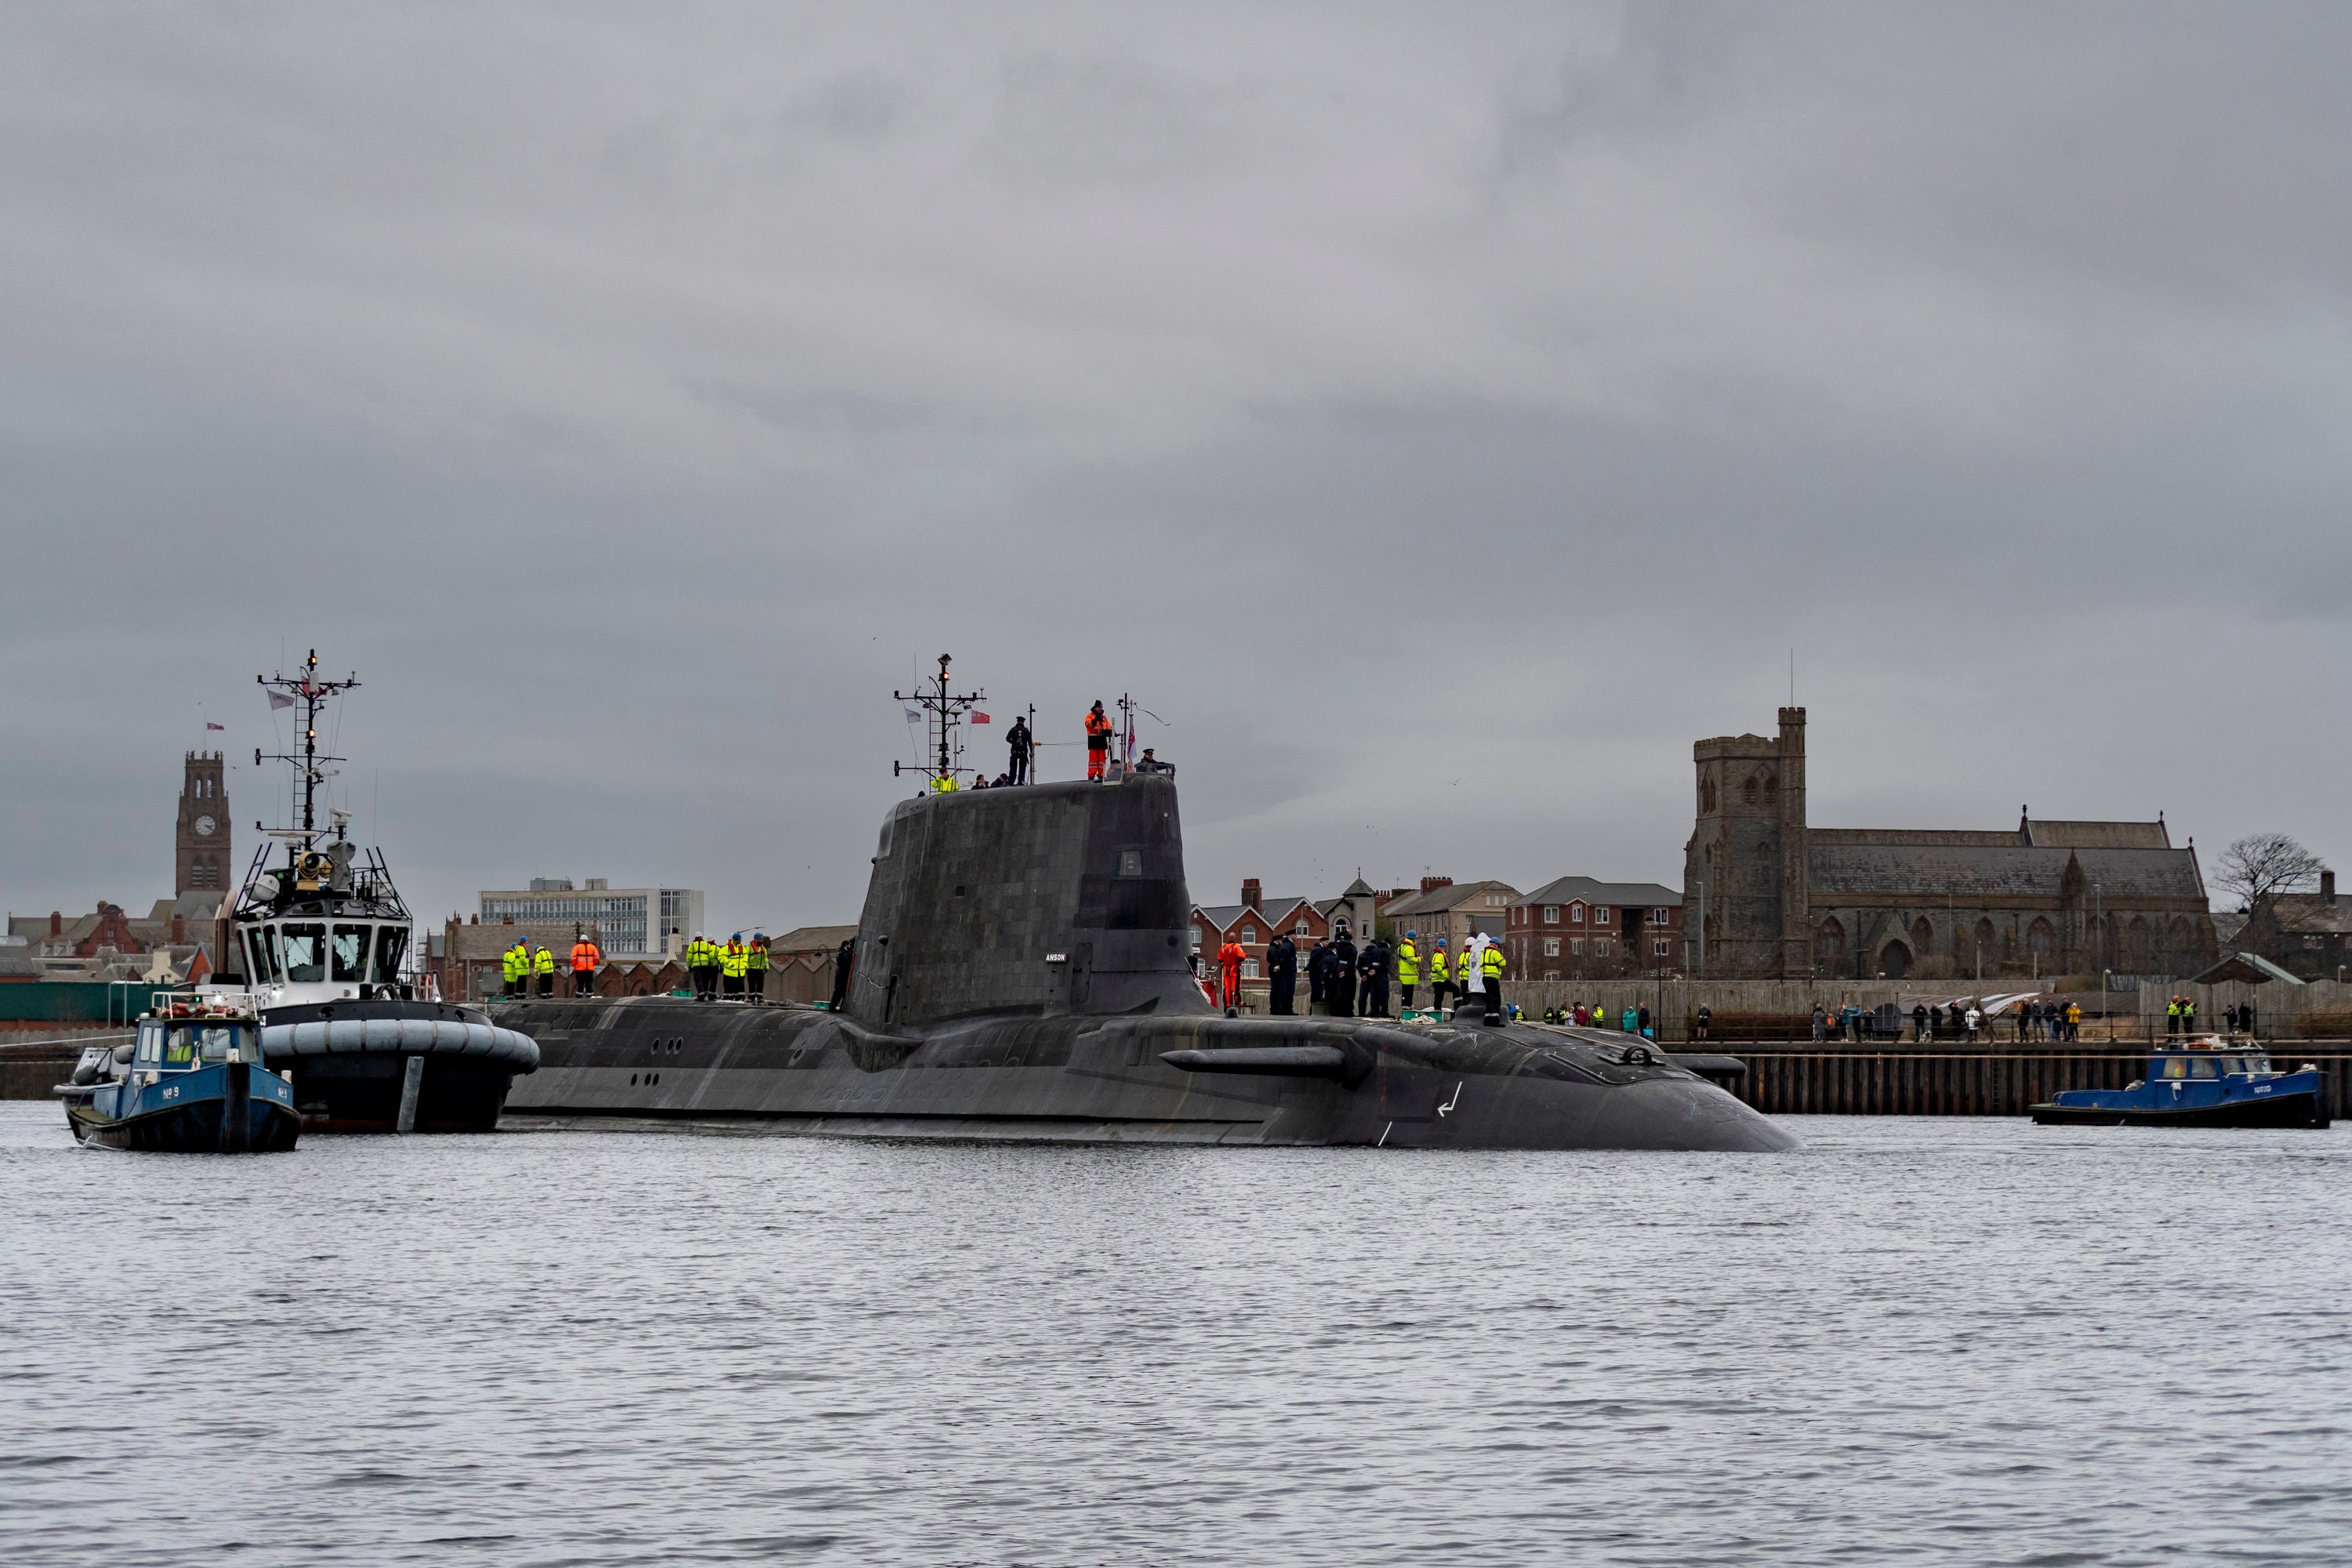 HMS Anson is the fifth Astute class submarine built by BAE Systems